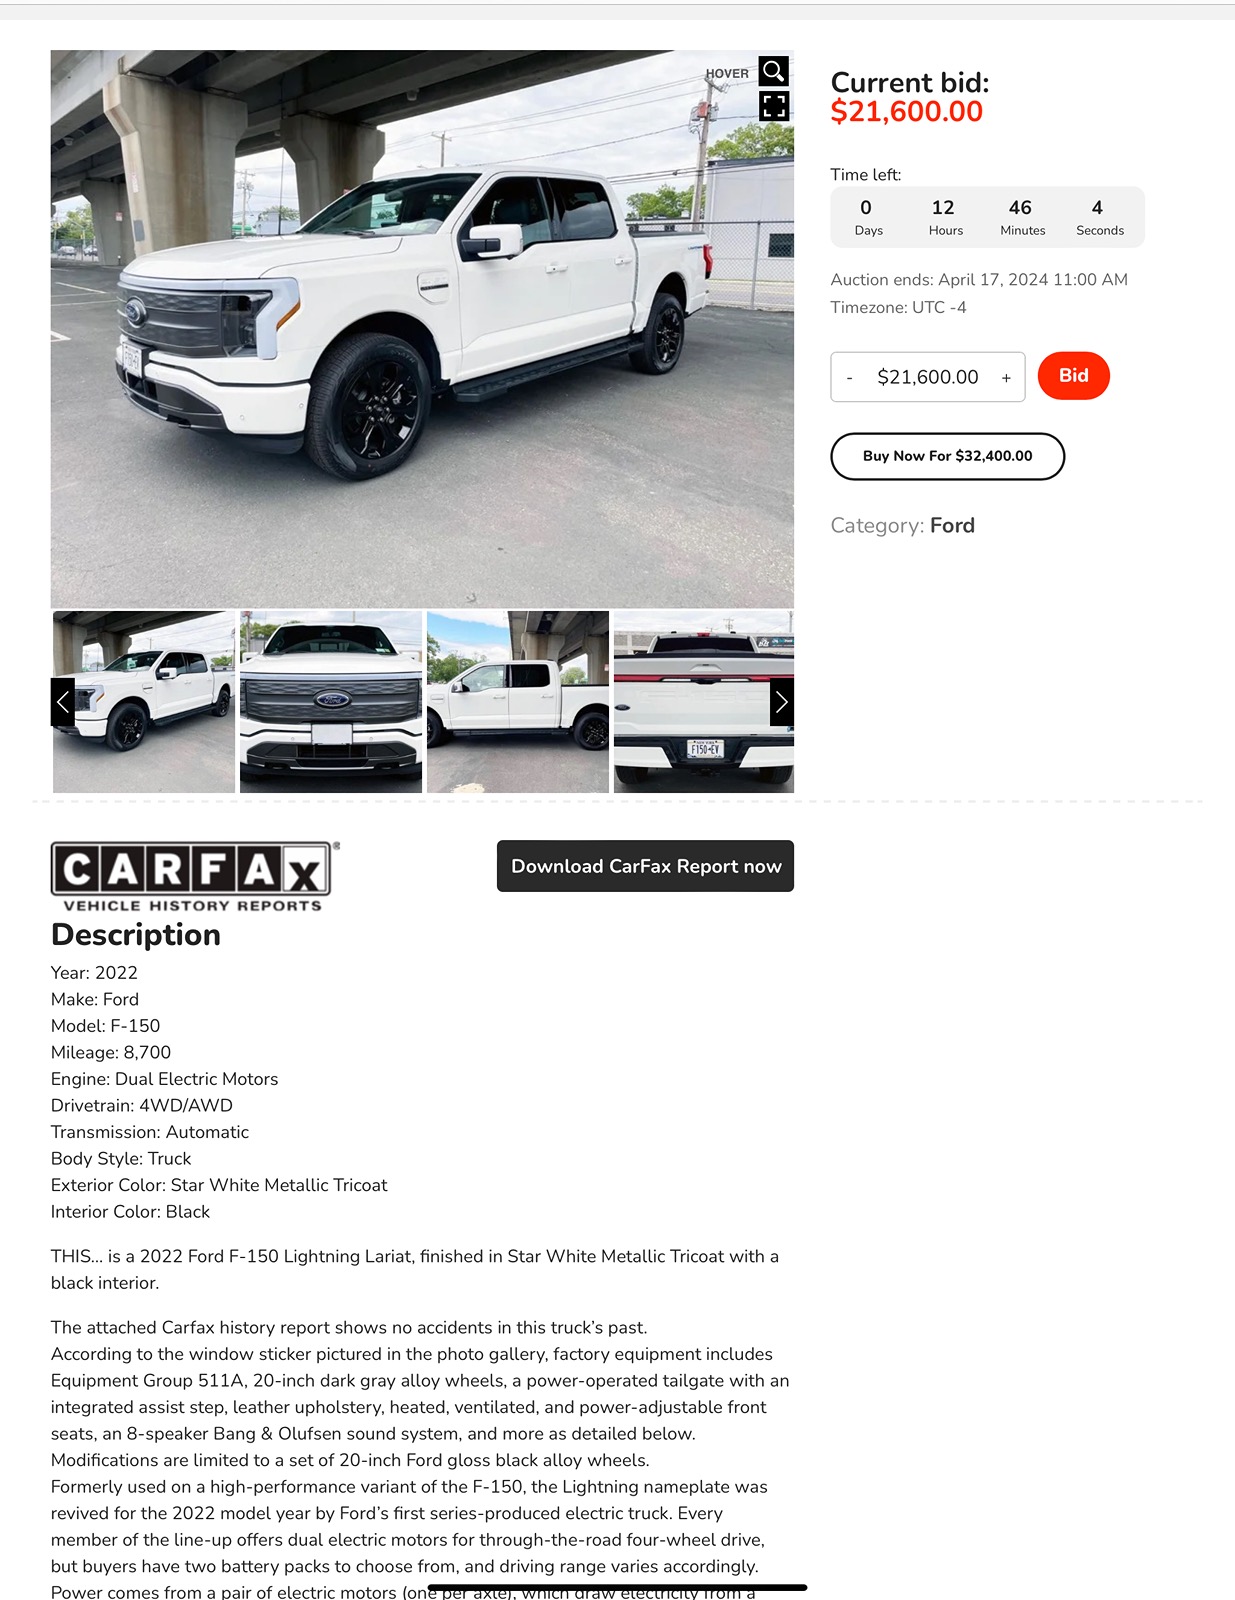 Ford F-150 Lightning Is this a scam, if so, what’s the scam? $32K for a fully loaded Lariat ER with 8K miles… IMG_4044